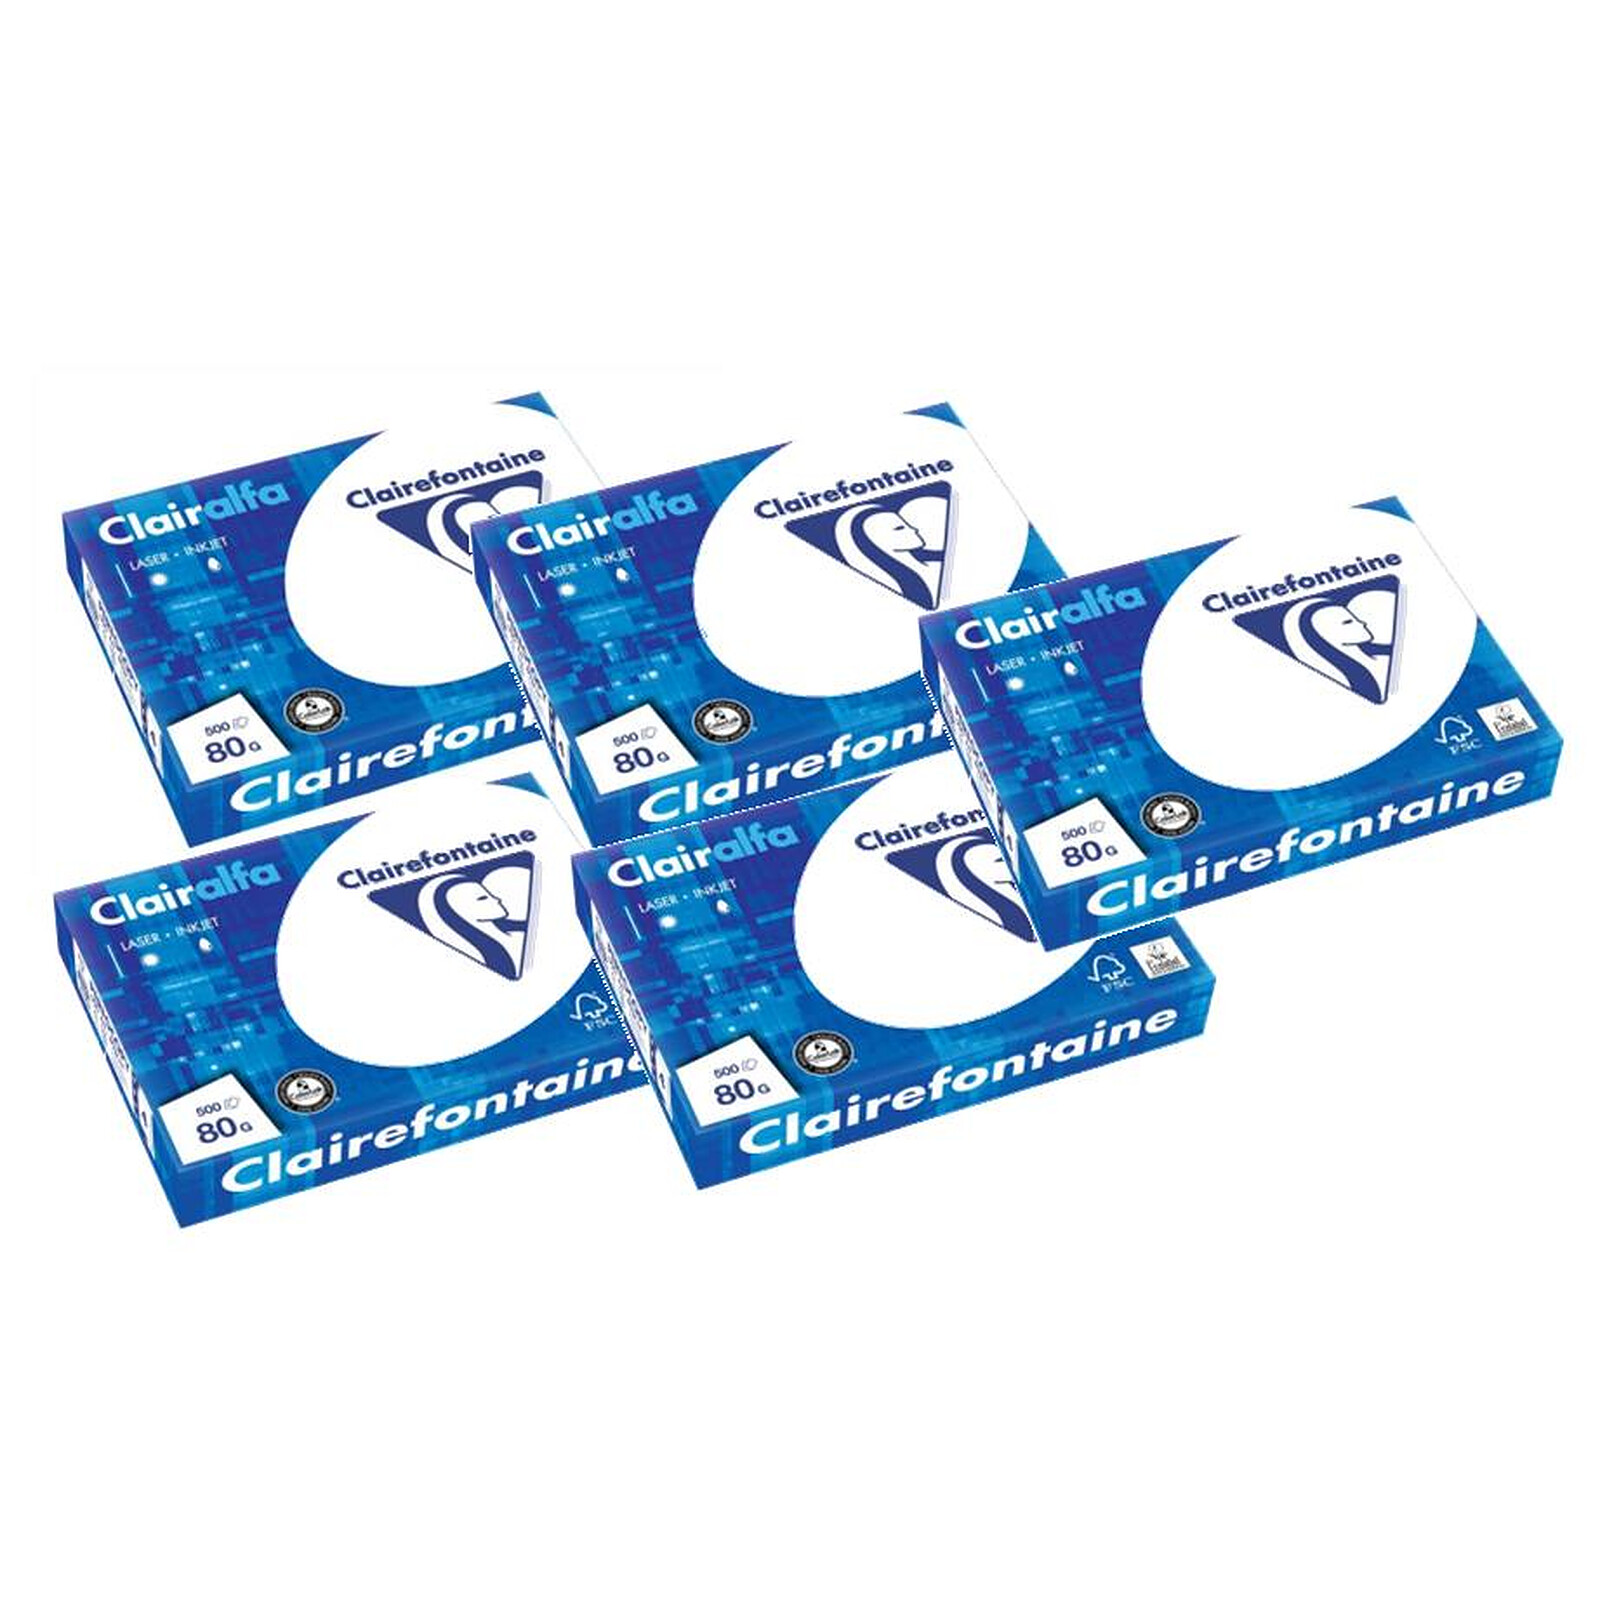 Clairefontaine Clairalfa A4 250g ramette 125 feuilles Blanc X5